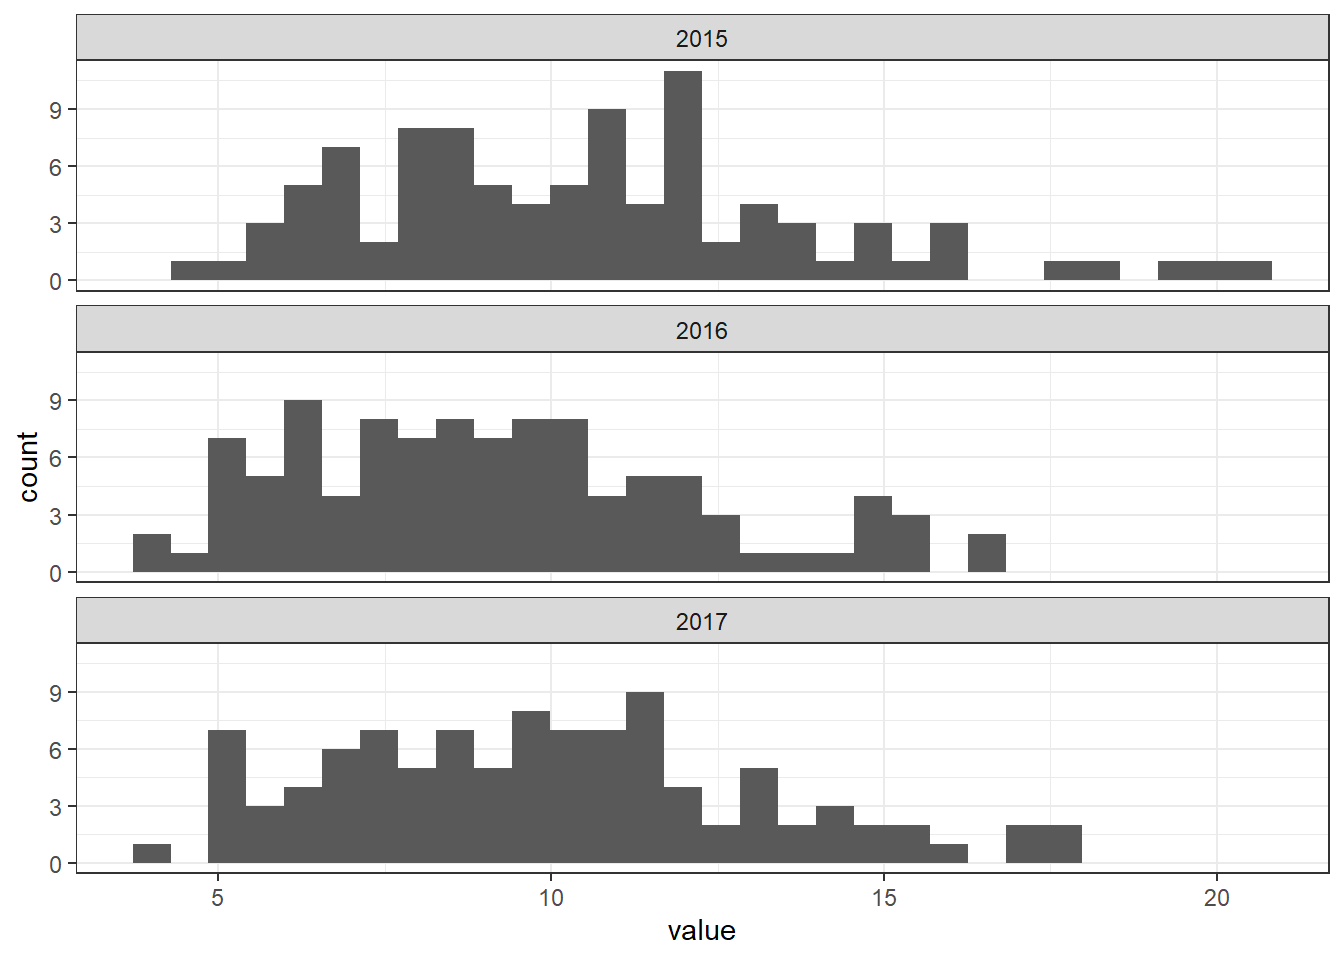 Histograms of PM$_{2.5}$ values for each year.